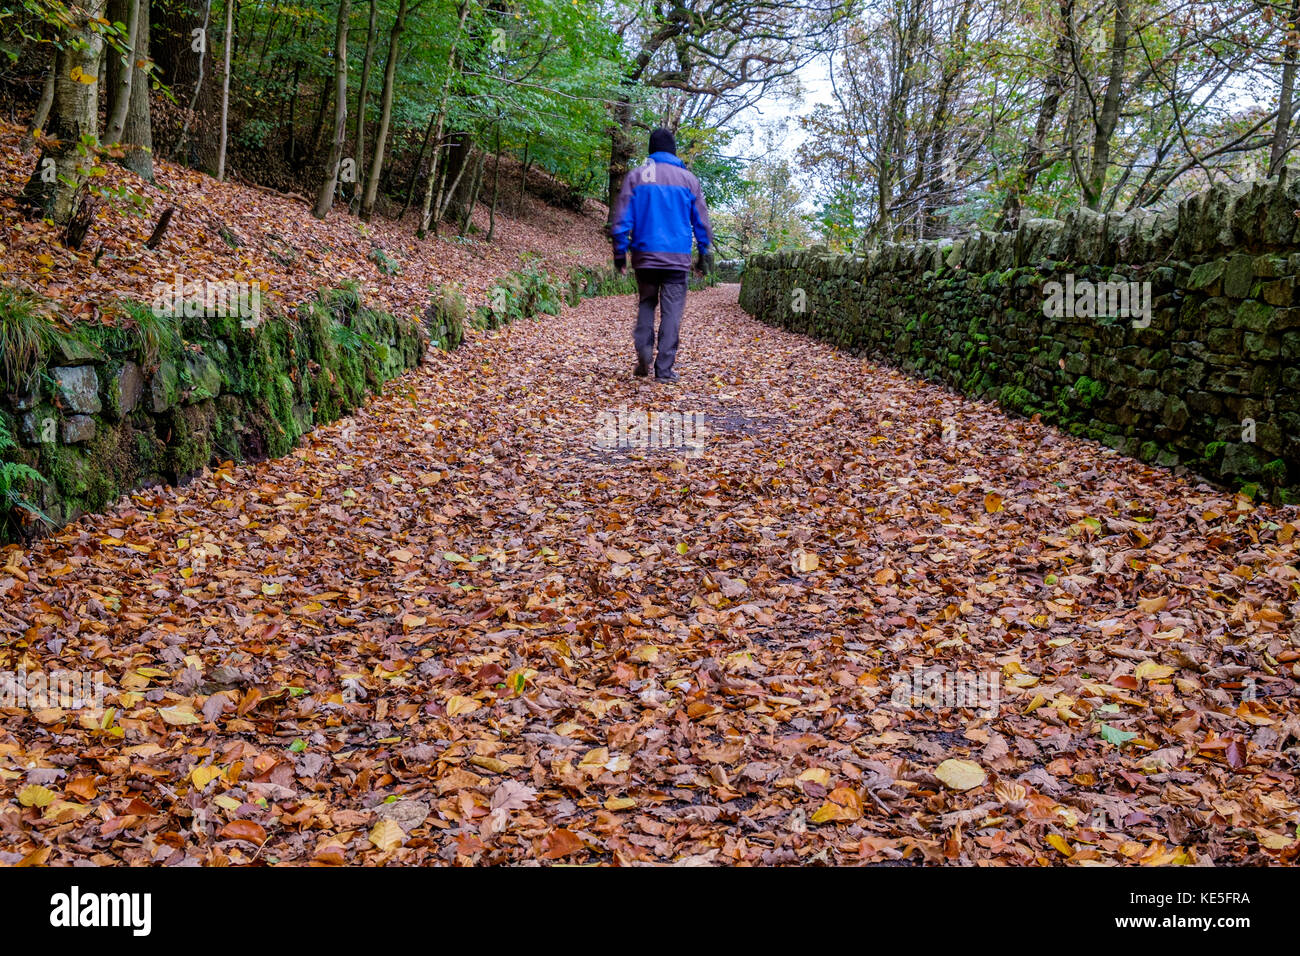 A man walking away from camera along a path with autumn leaves on the ground Stock Photo